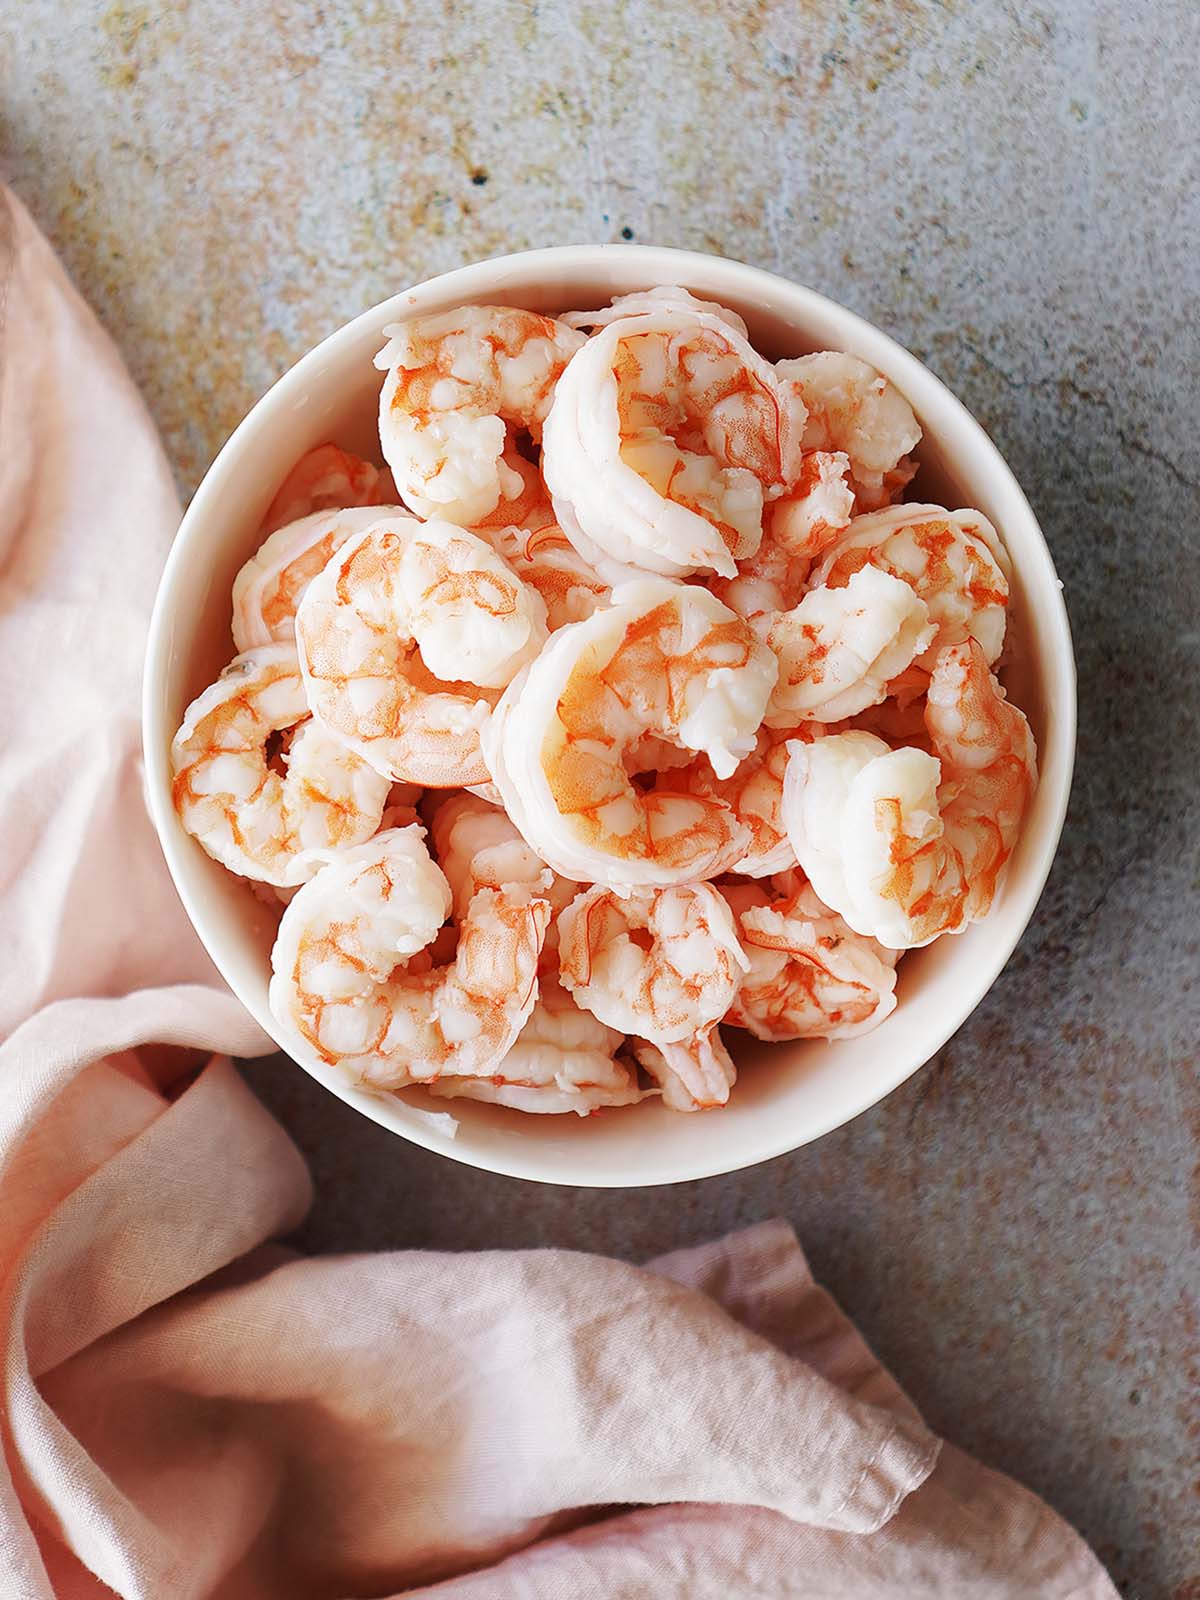 A white bowl with cooked shrimp and a pink fabric napkin on the side.